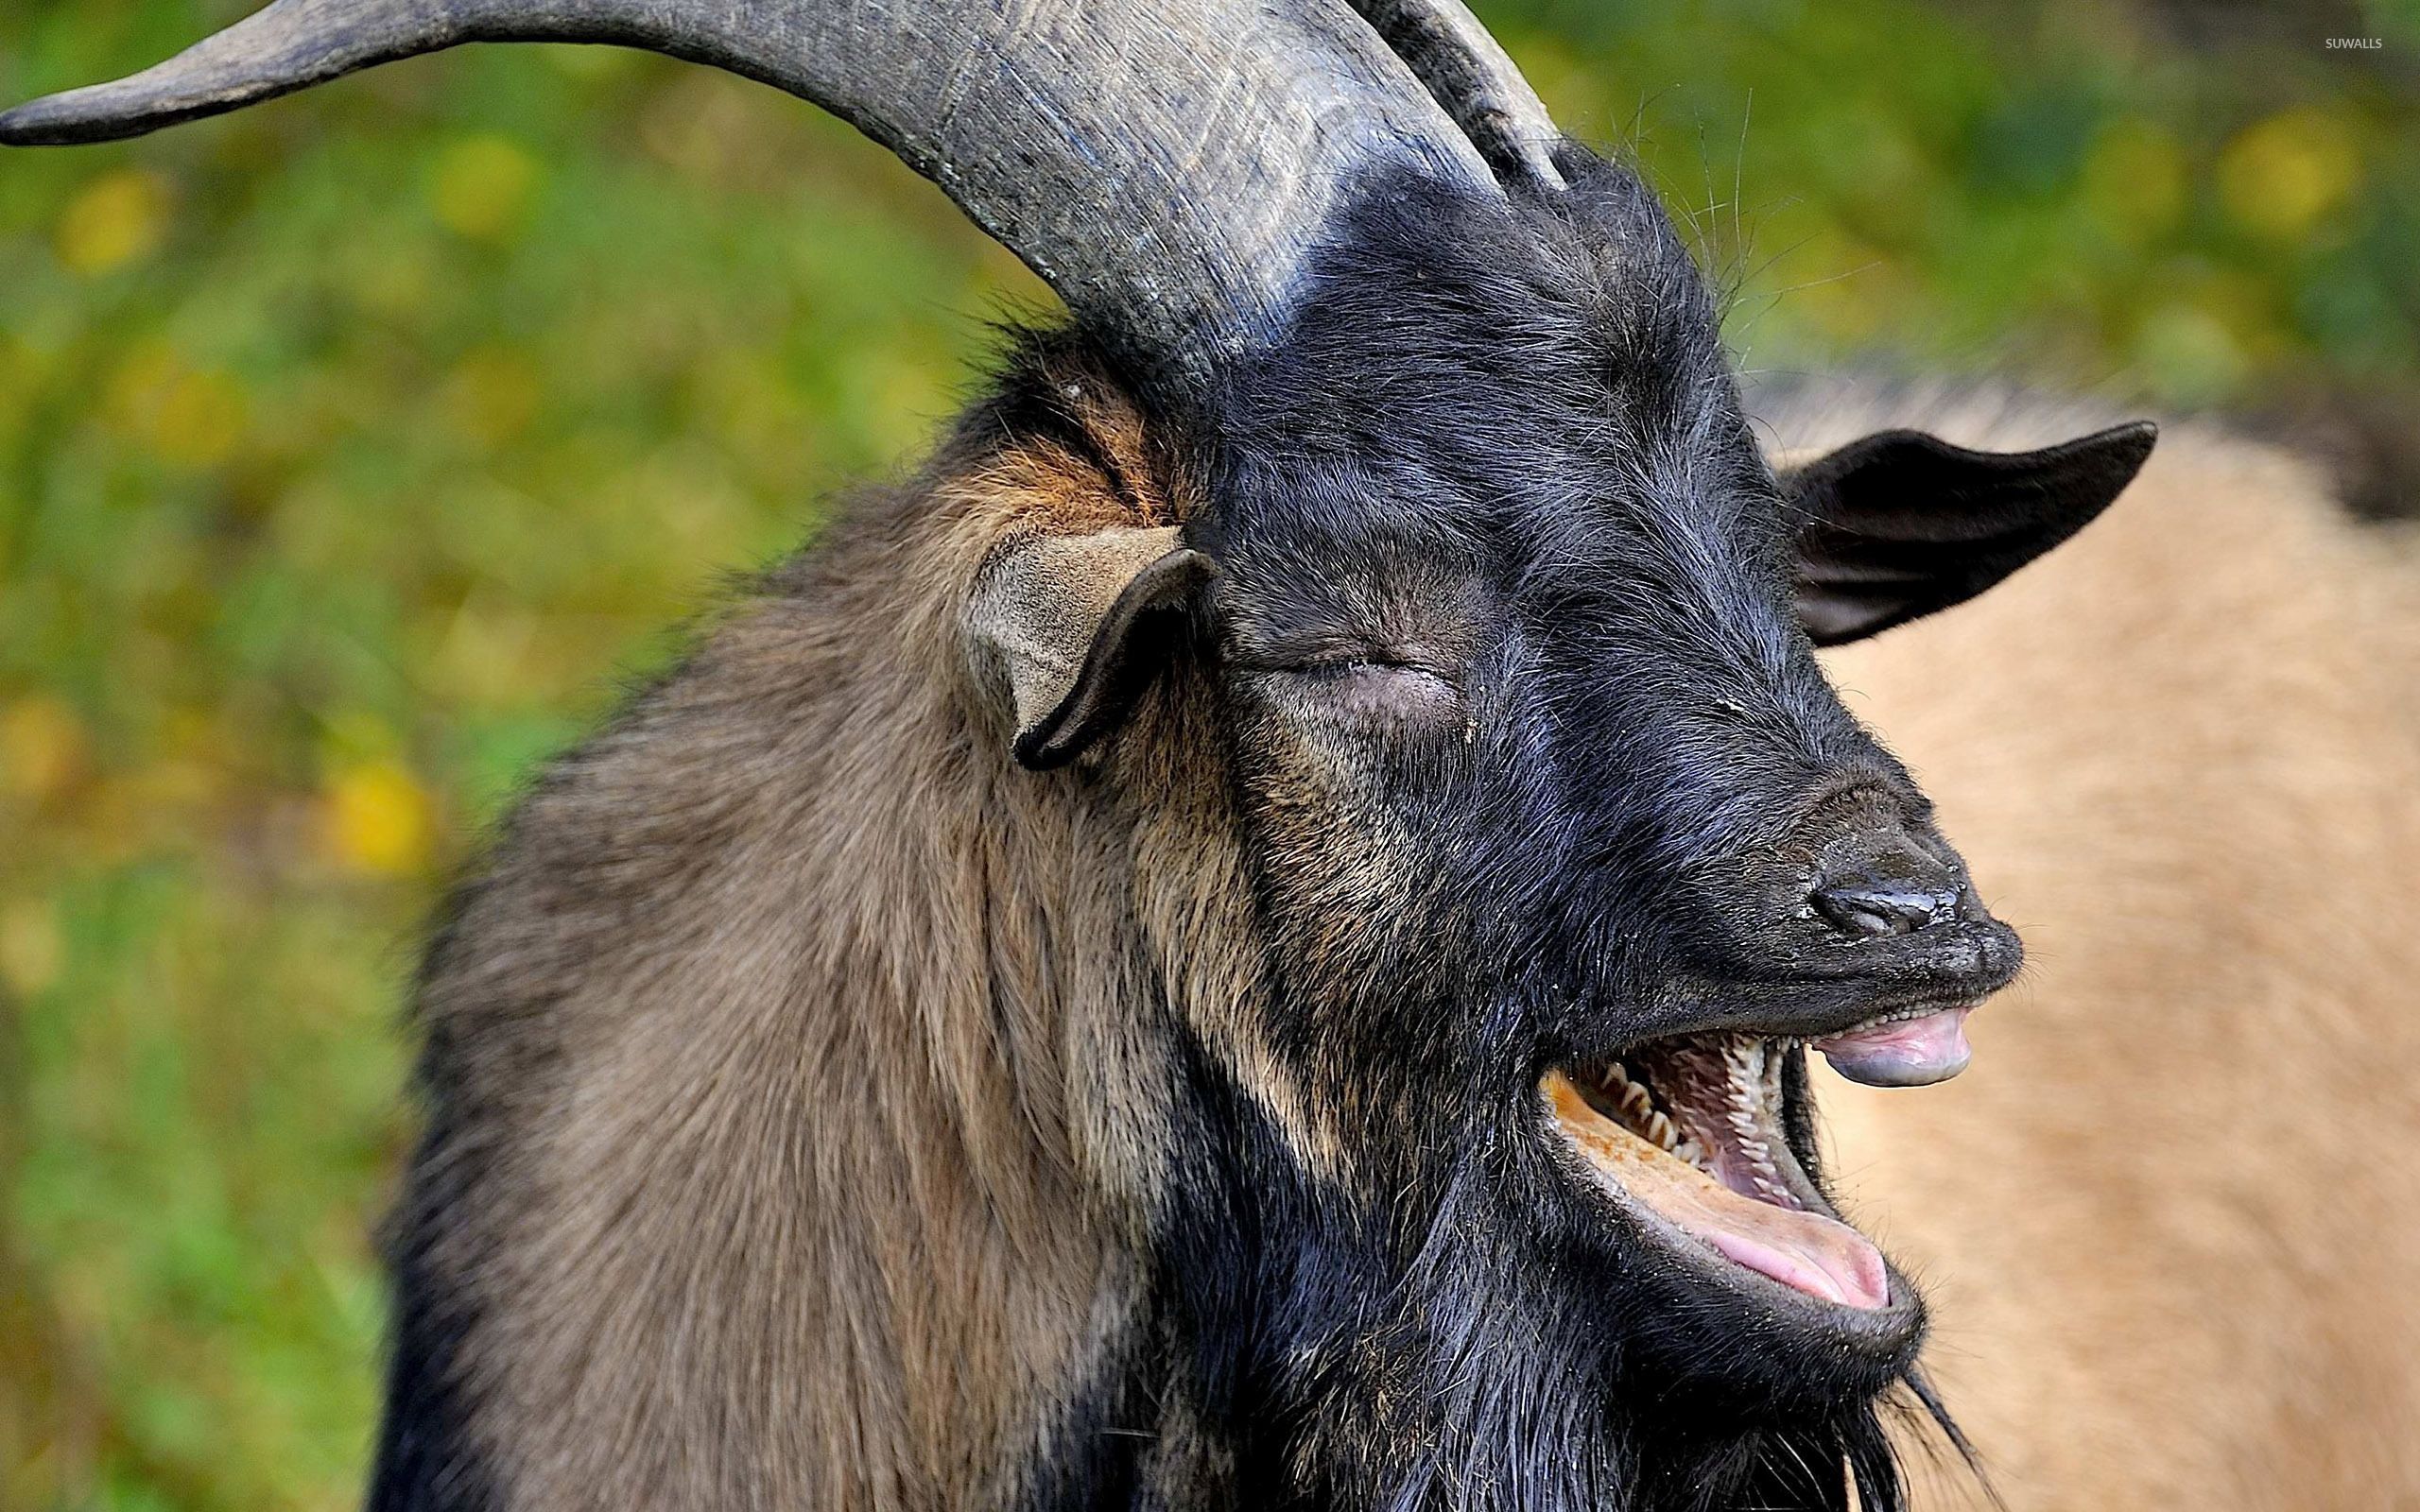 Funny Goat Wallpaper Zellox. Funny goat picture, Goat picture, Goats funny